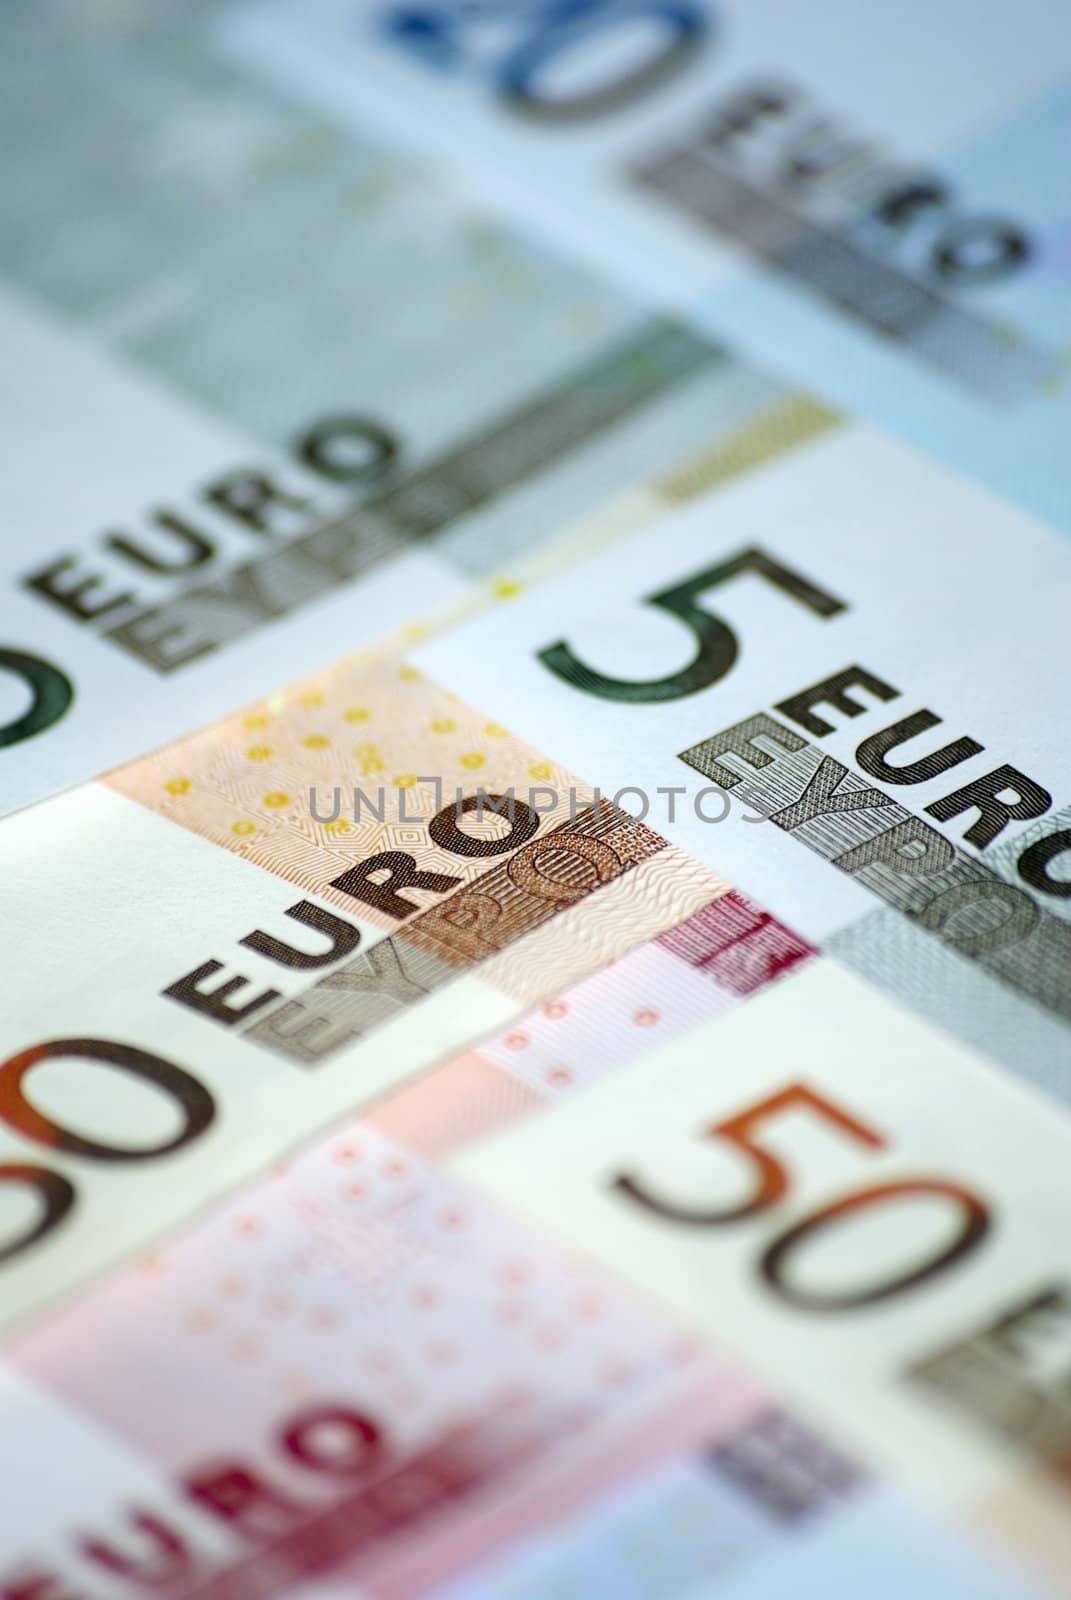 Euro Currency. Concept.